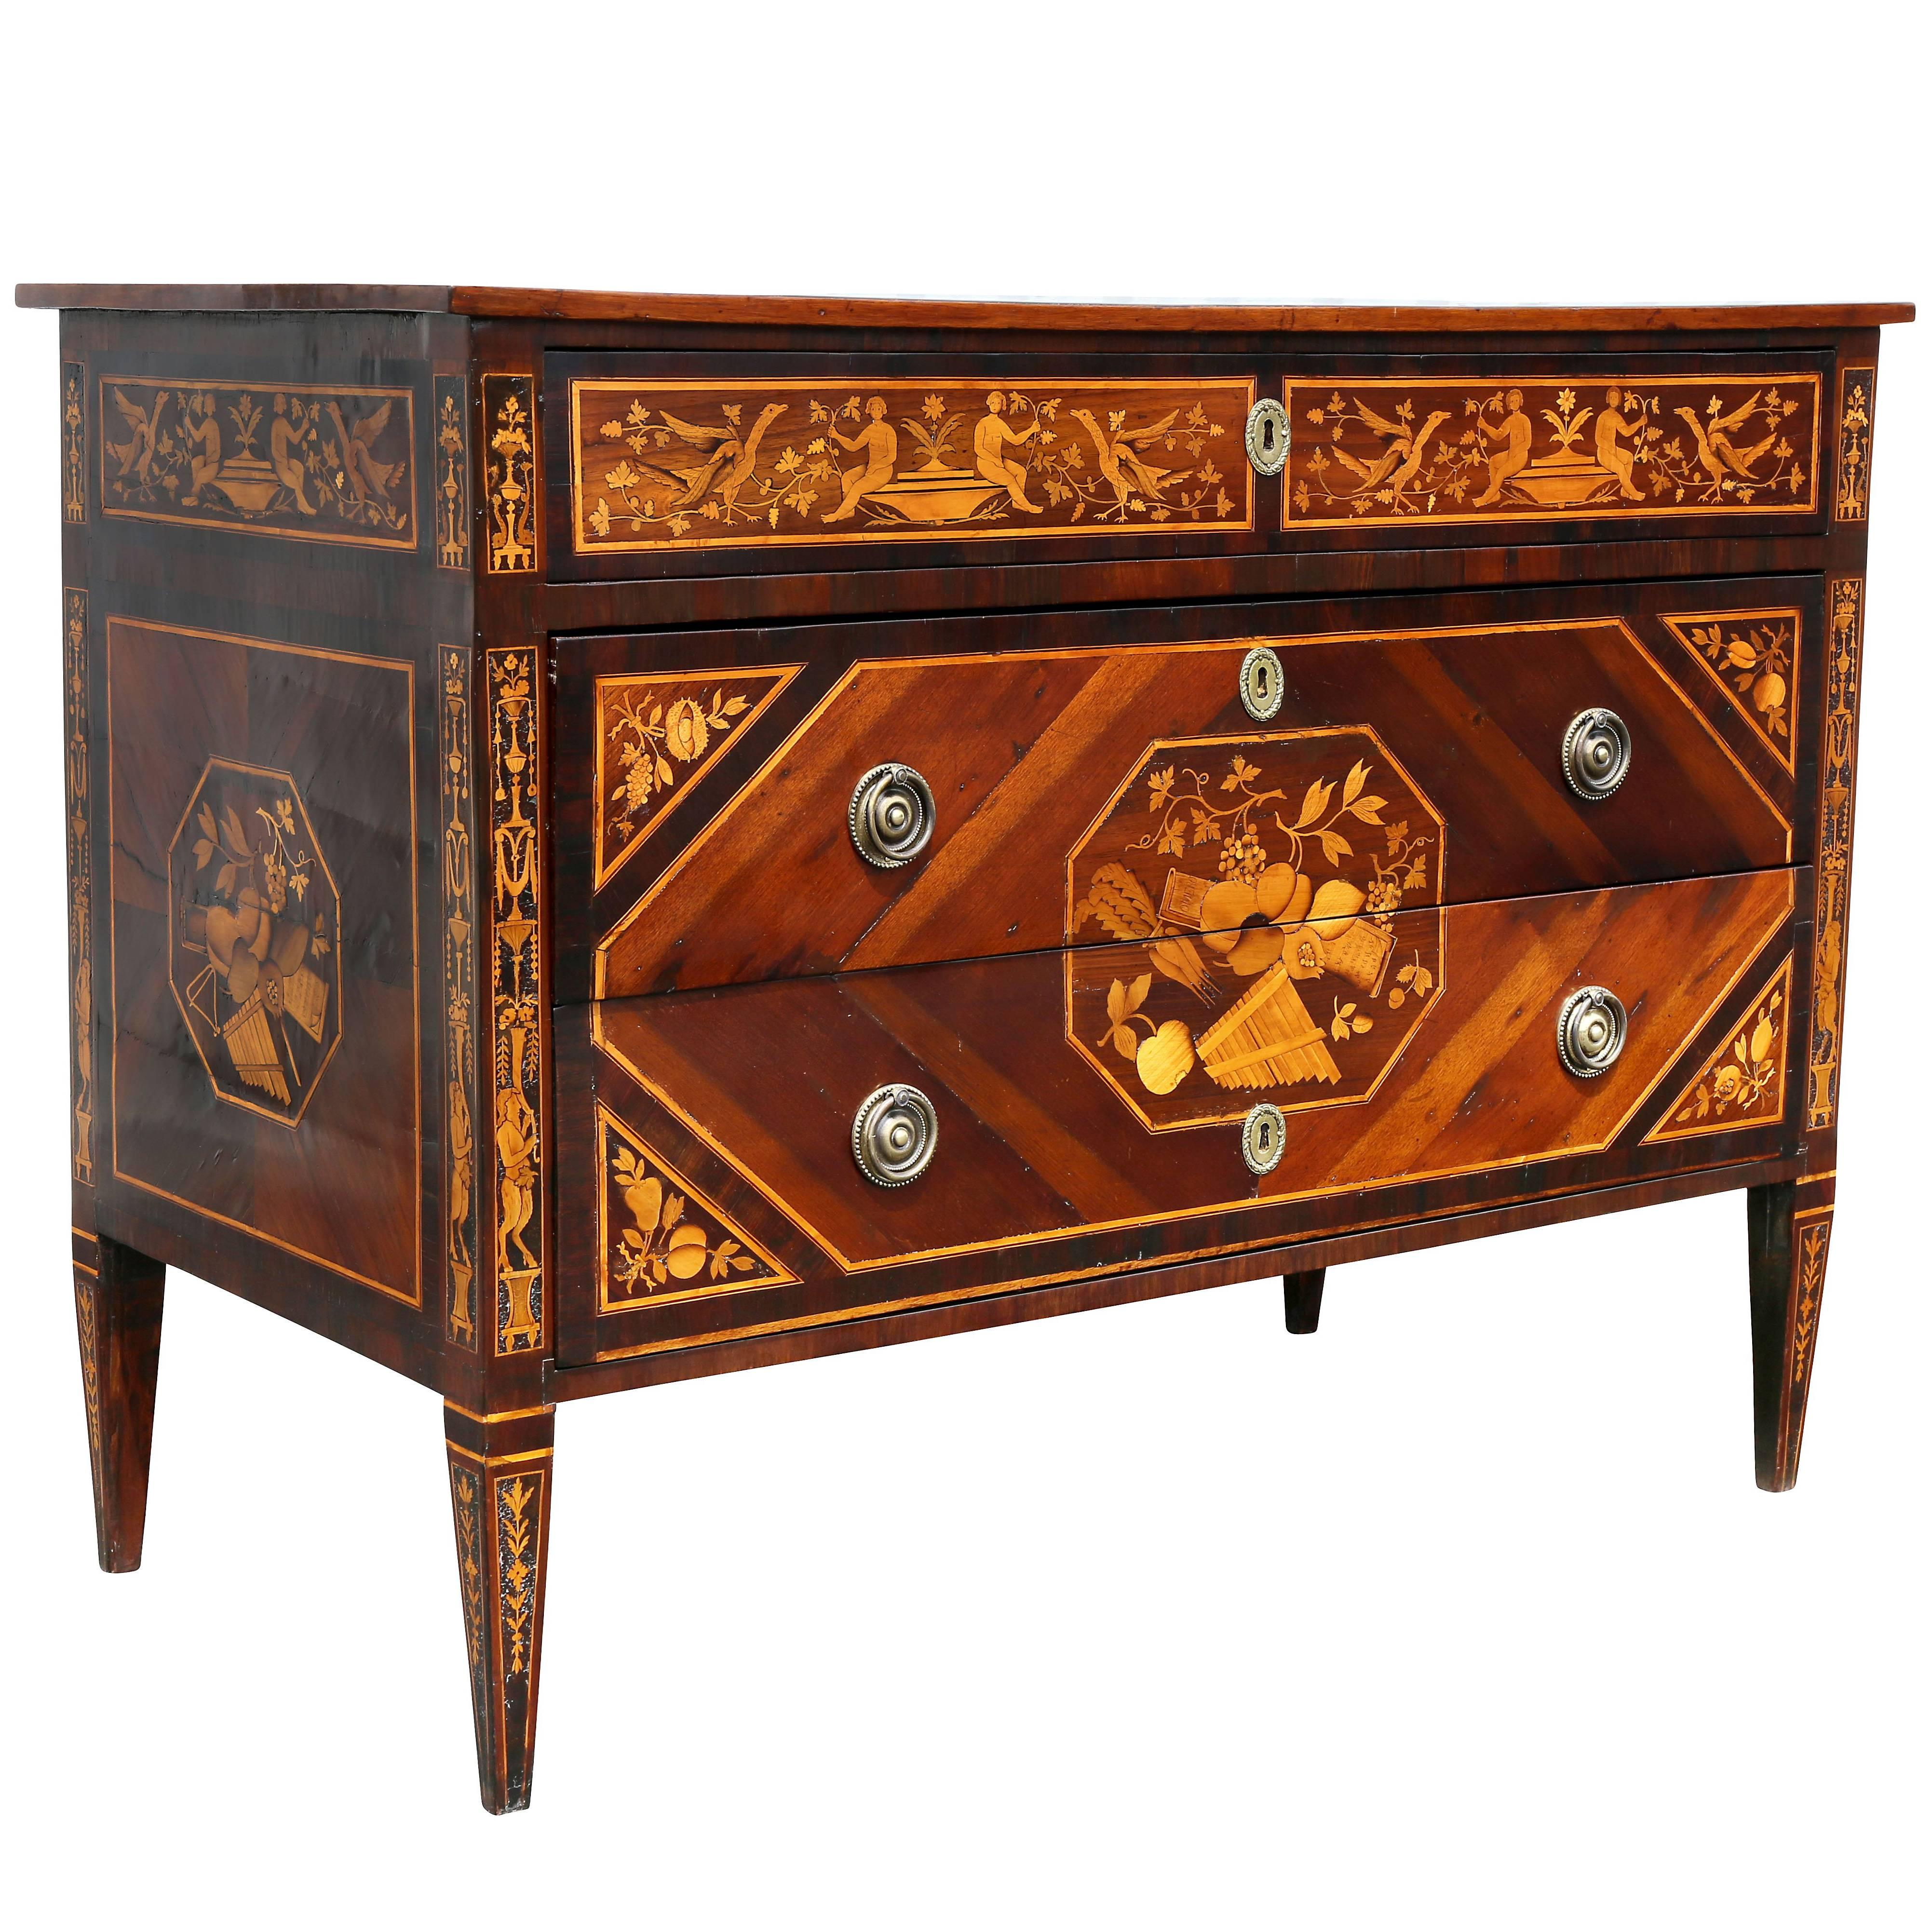 Italian Neoclassic Marquetry Inlaid Commode For Sale